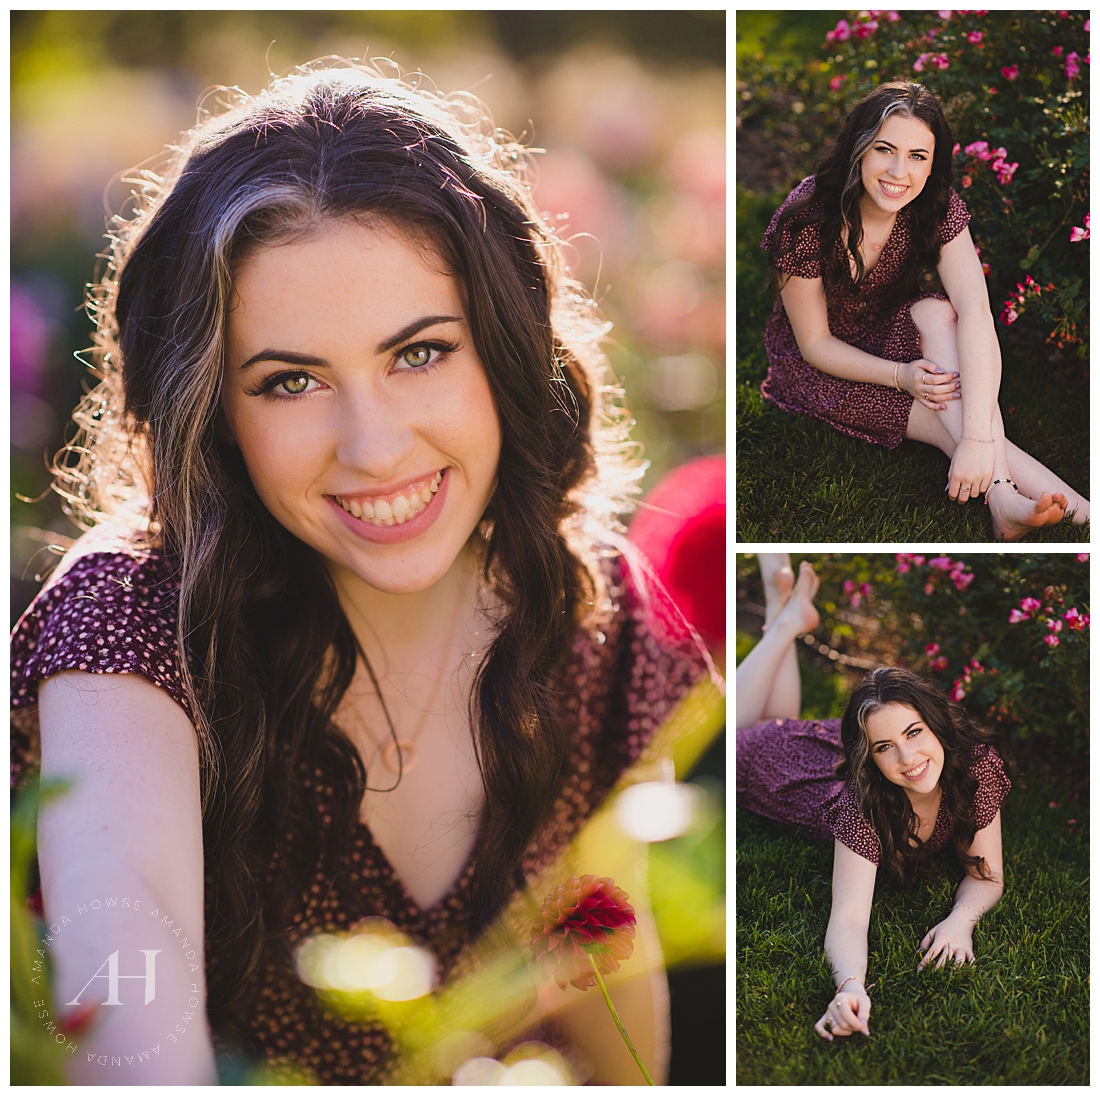 Sunlit Senior Portraits | Smiling Senior Portraits, Fall Outfit Inspo, Cute Dresses for September Senior Portraits | Photographed by the Best Tacoma Senior Portrait Photographer Amanda Howse